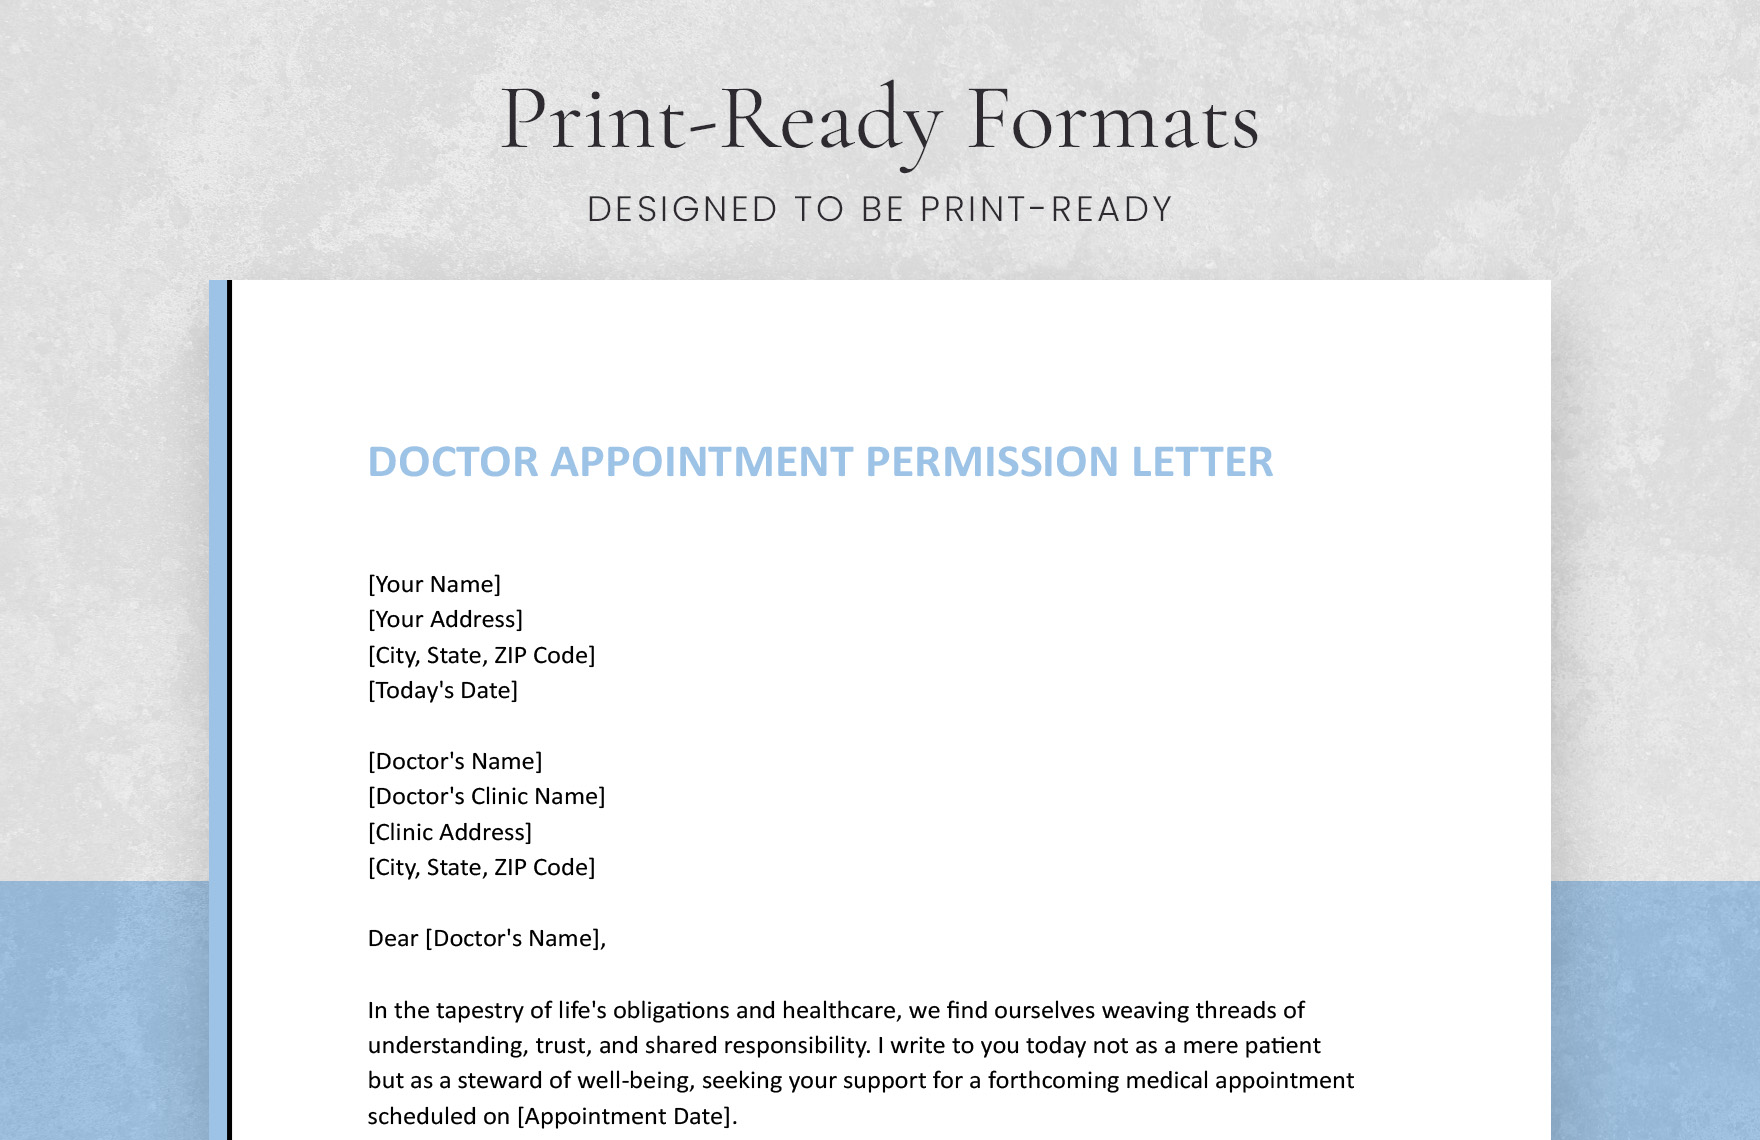 Doctor Appointment Permission Letter